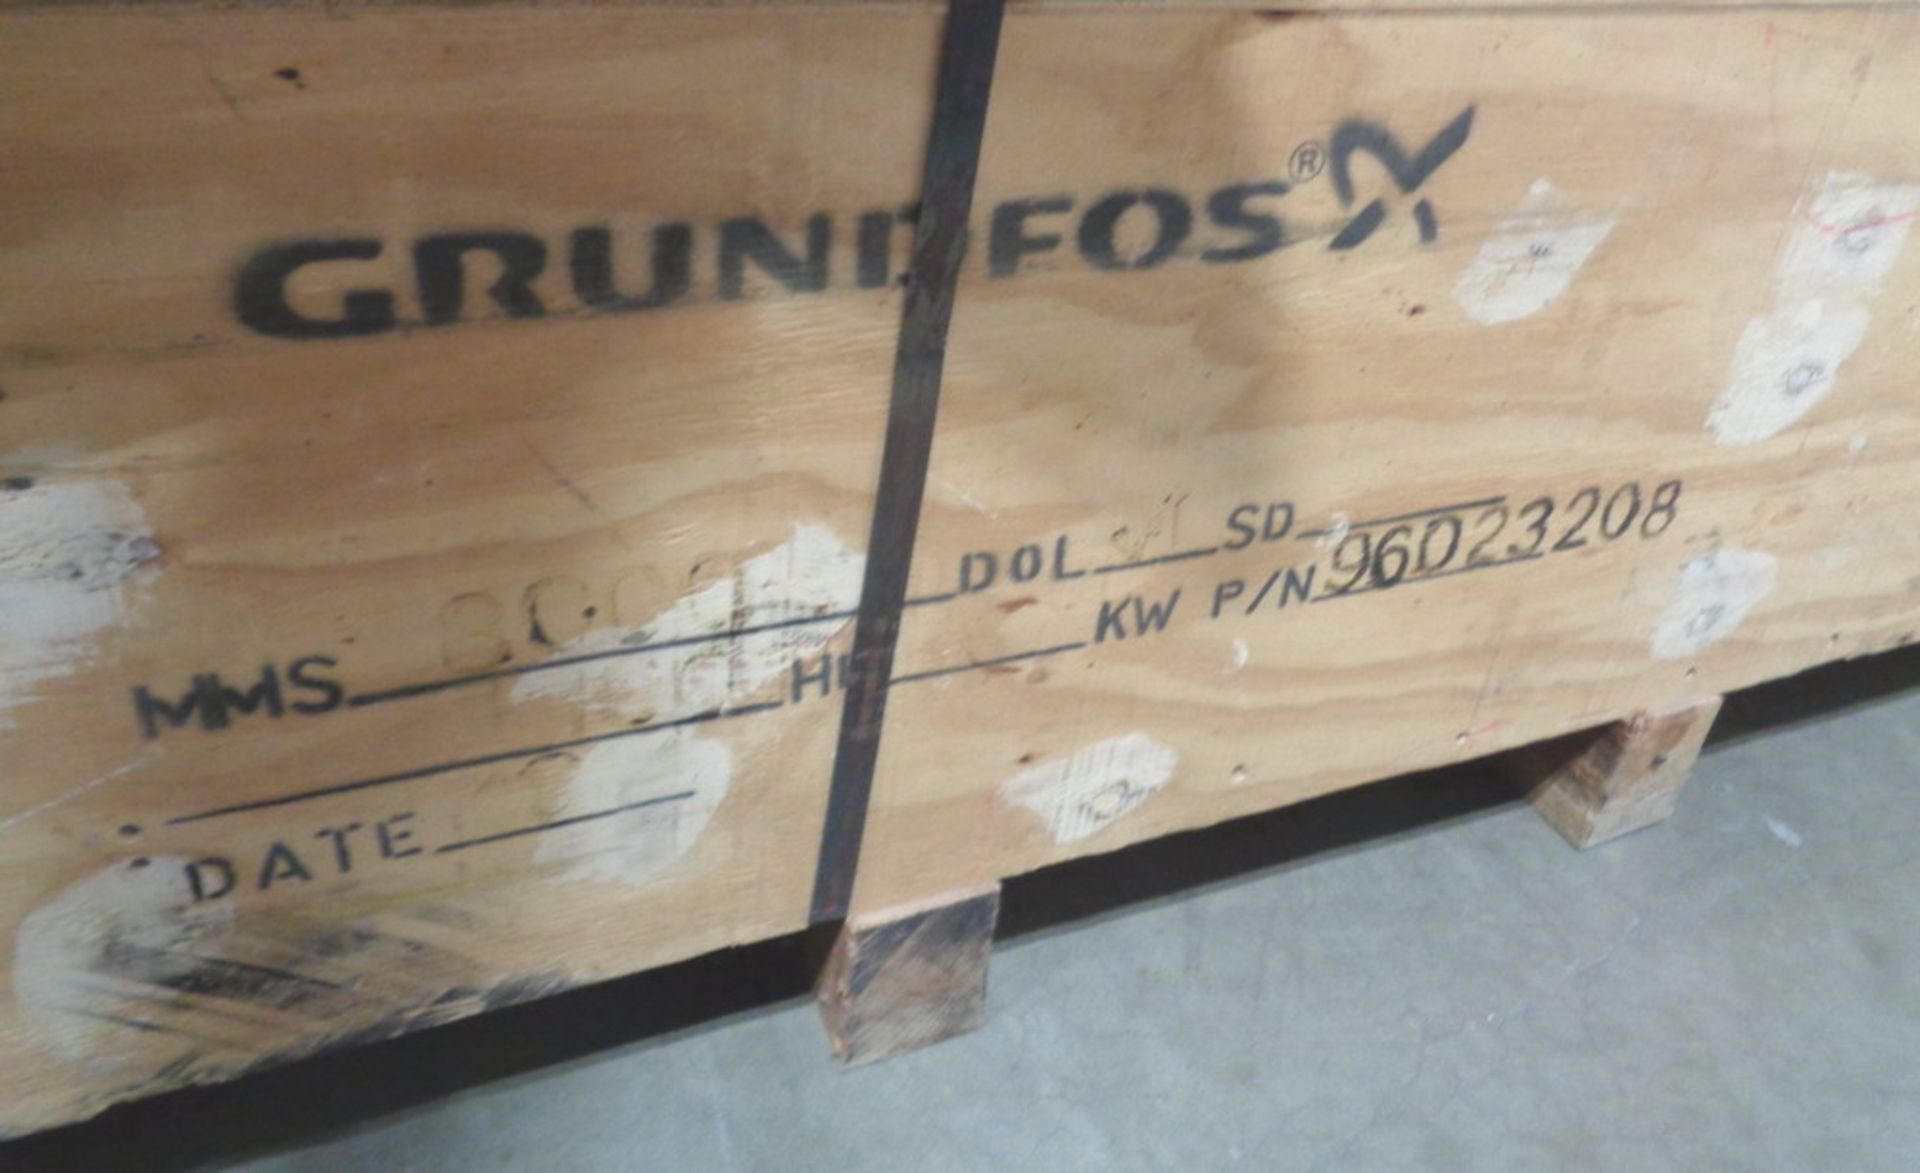 UNUSED Grundfos Stainless Steel Submersible 1100 GPM Pump w/ SS Submersible 100 HP Motor - Image 4 of 6